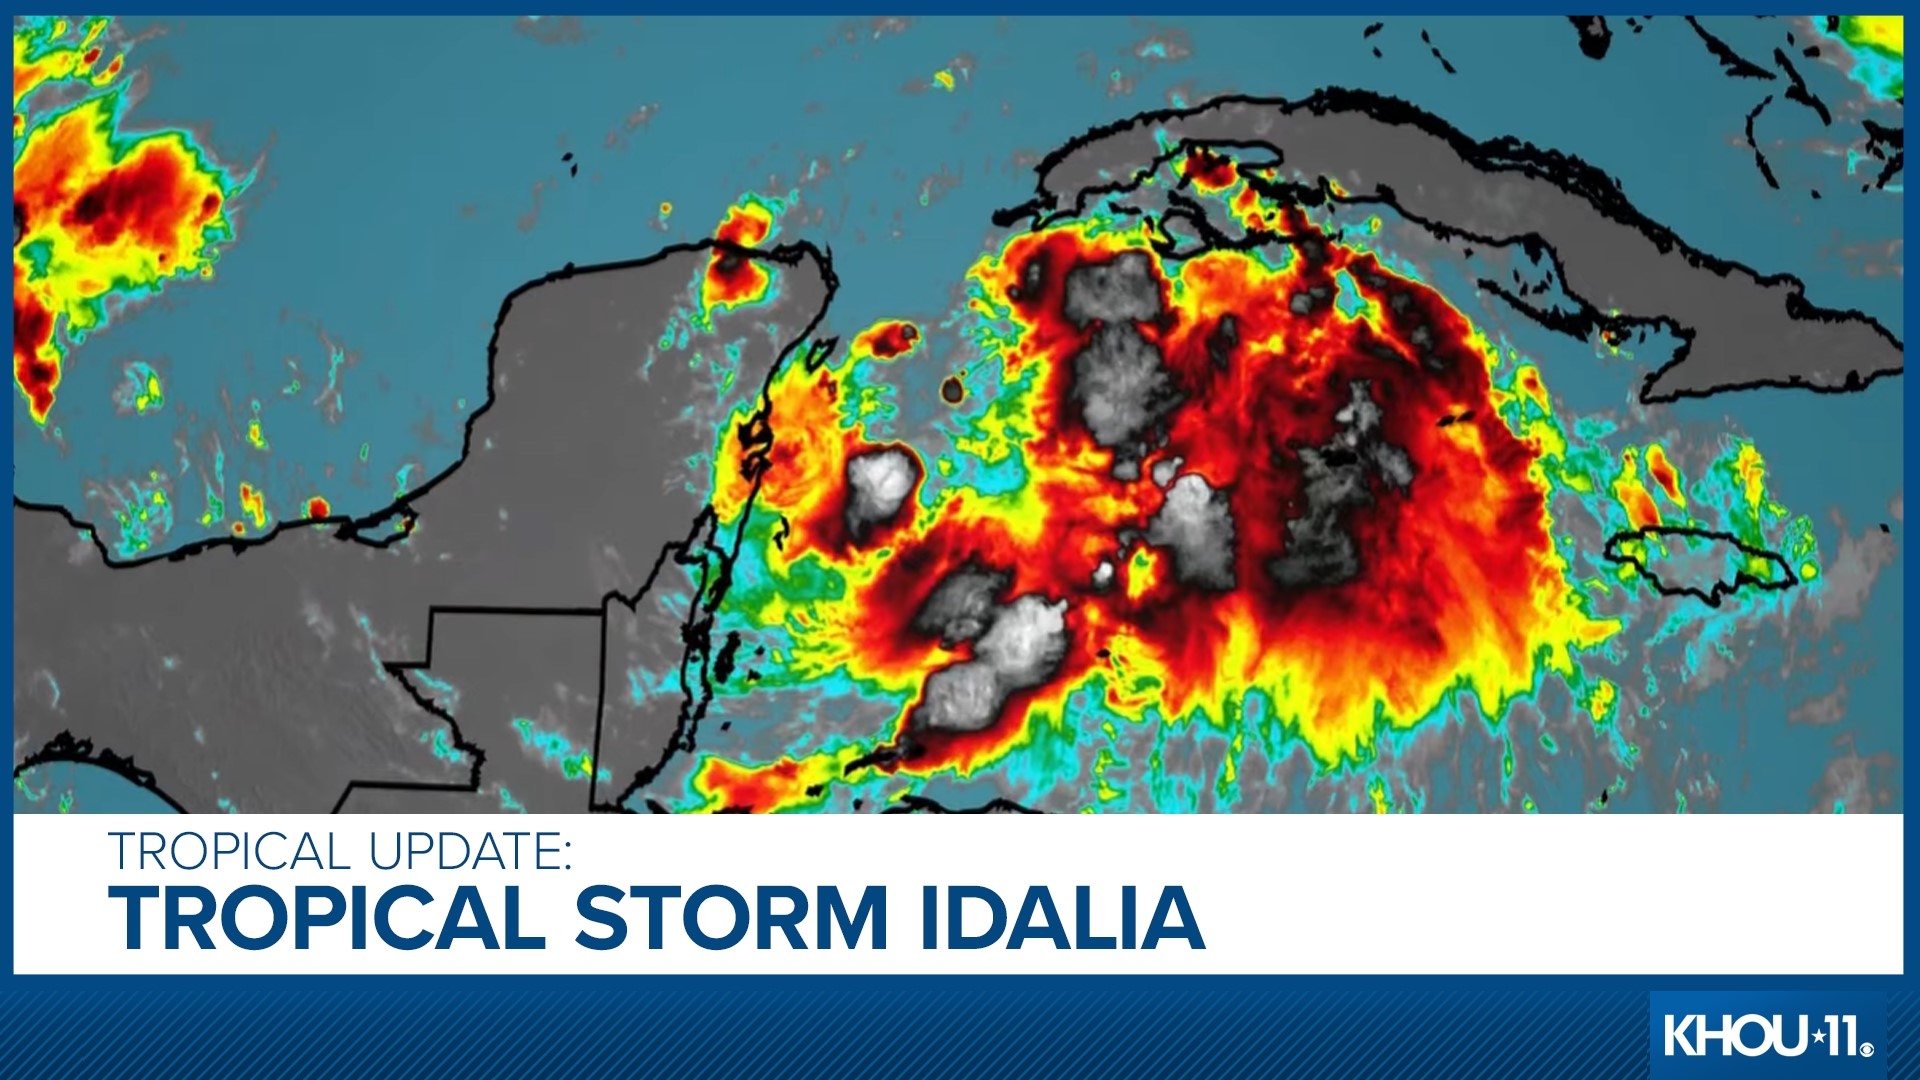 Tropical Storm Idalia is expected to become a hurricane before landfall somewhere along the eastern Gulf coast.